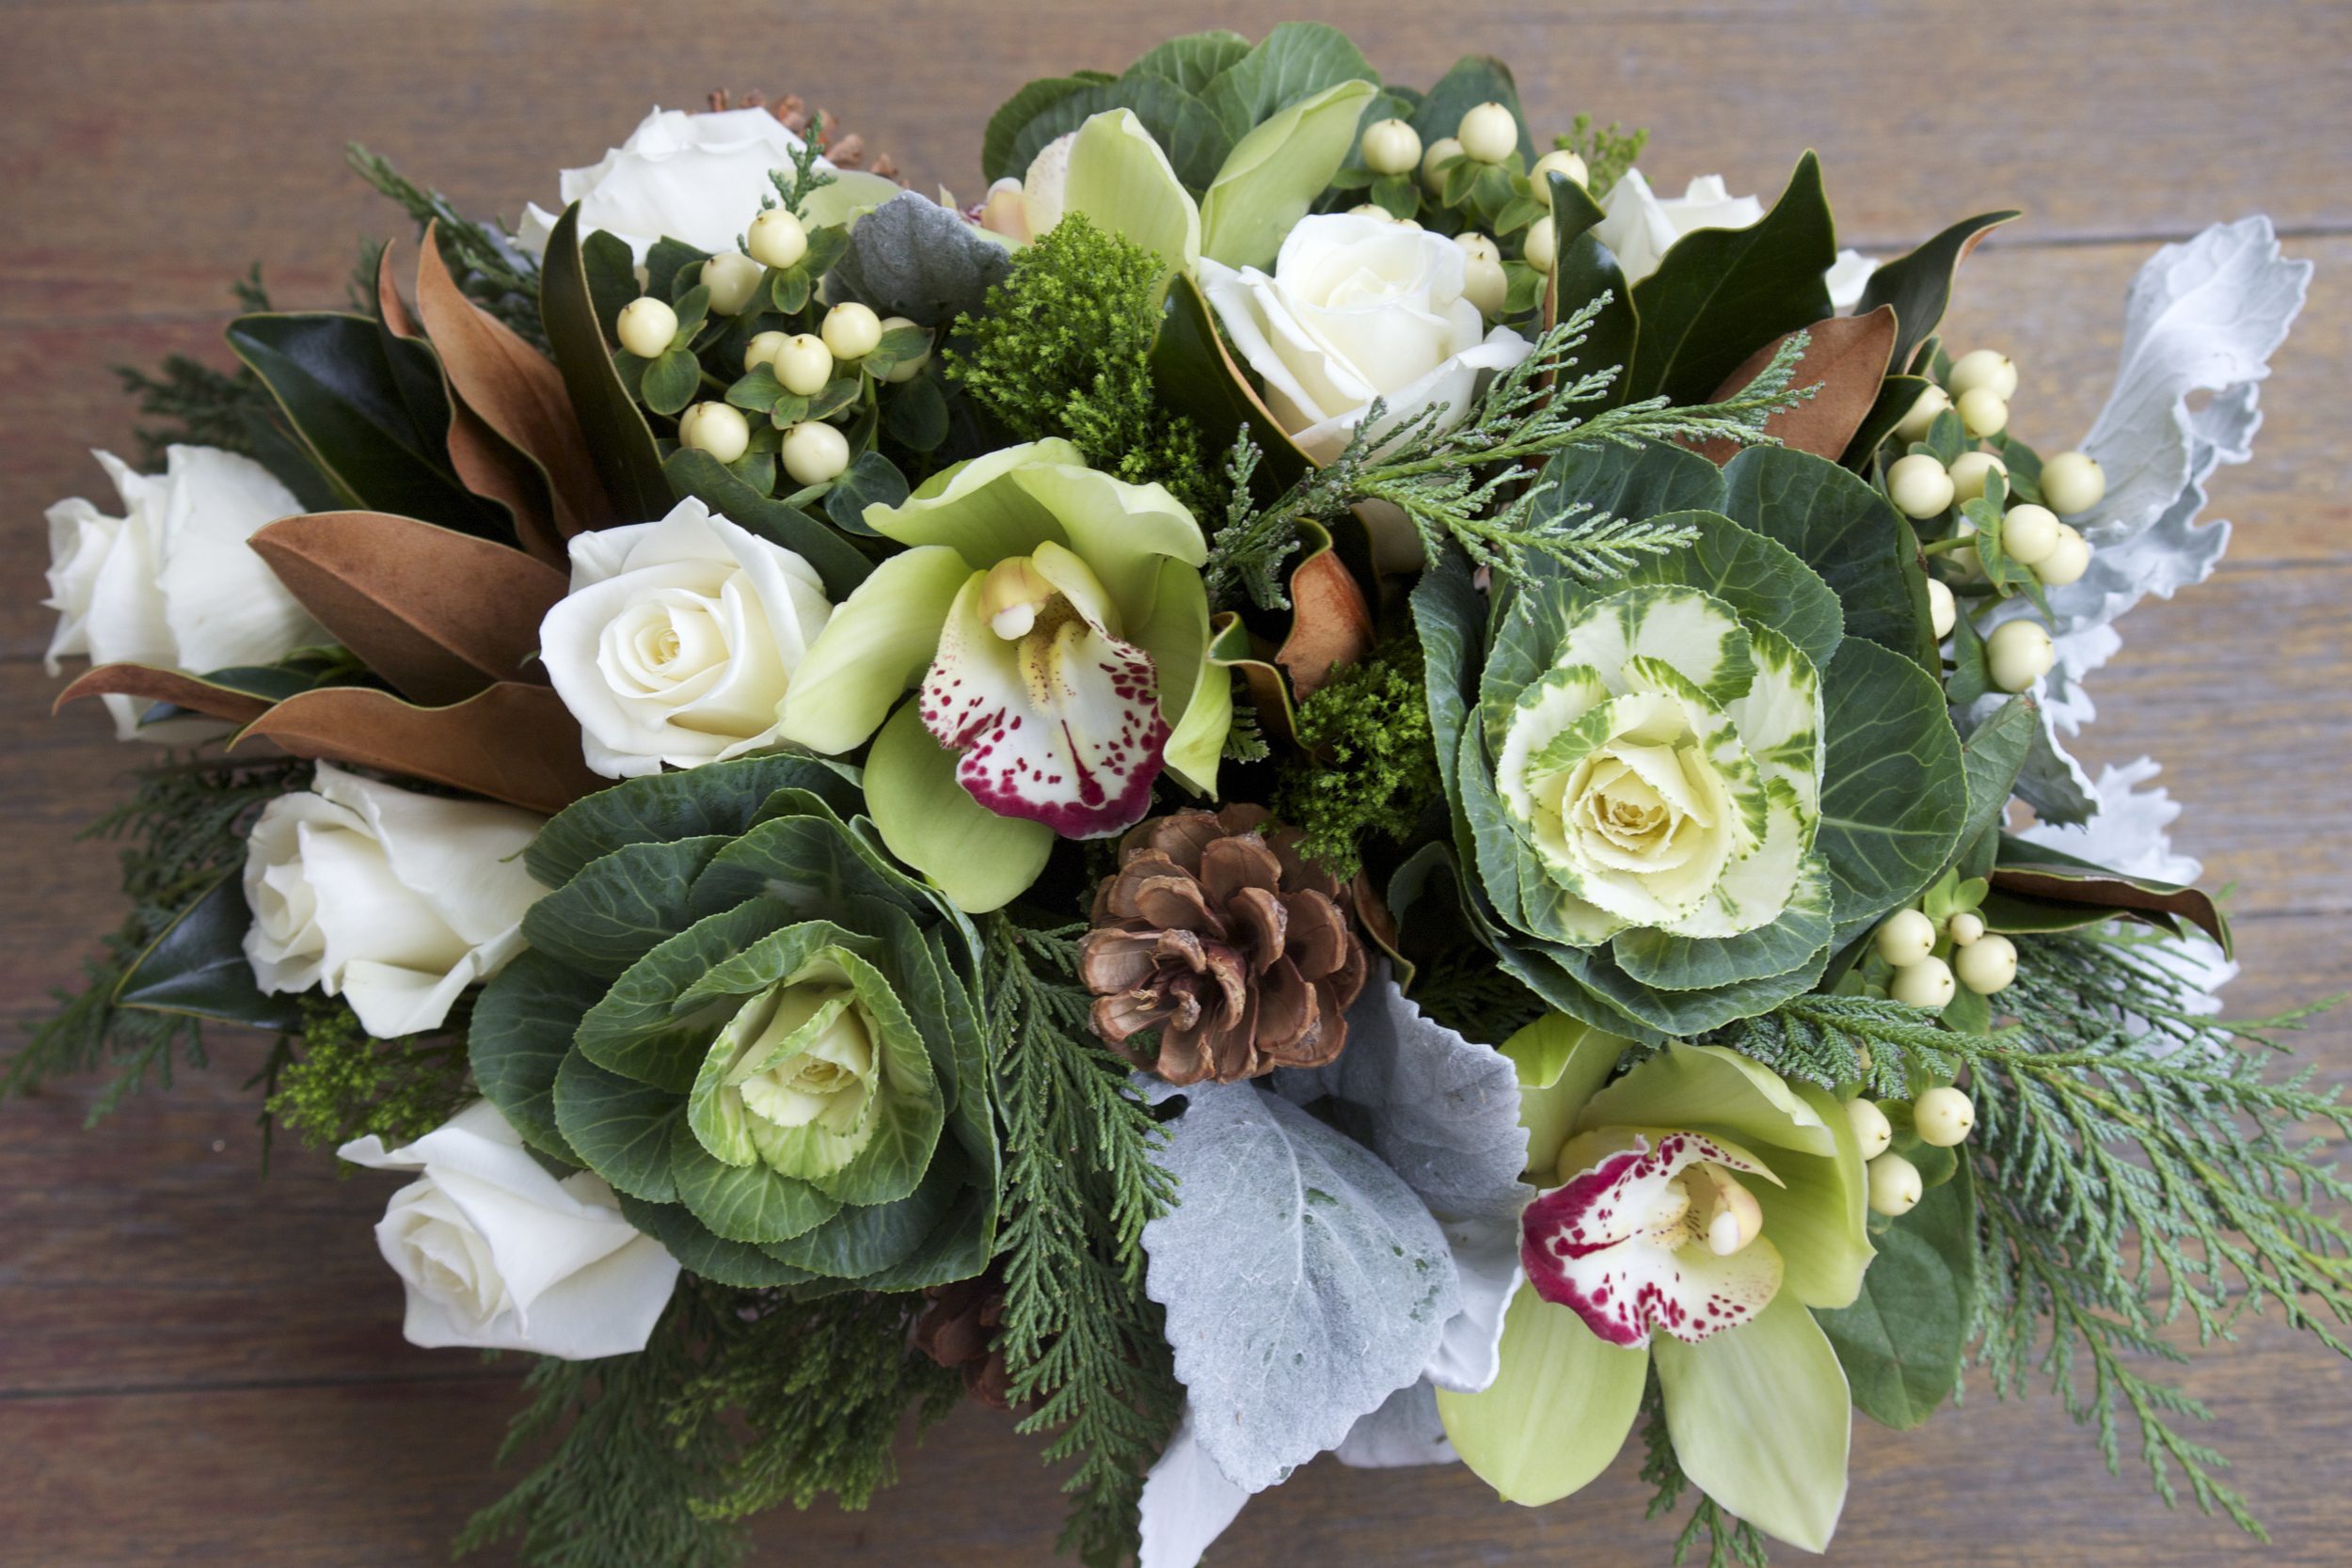 Magnolia leaves (brown), white roses, white Hypericum berries, green Cymbidium orchids (green flower with red tips), decorative cabbage, pine cone, cedar (feather-like greenery), Dusty Miller (gray leaves)